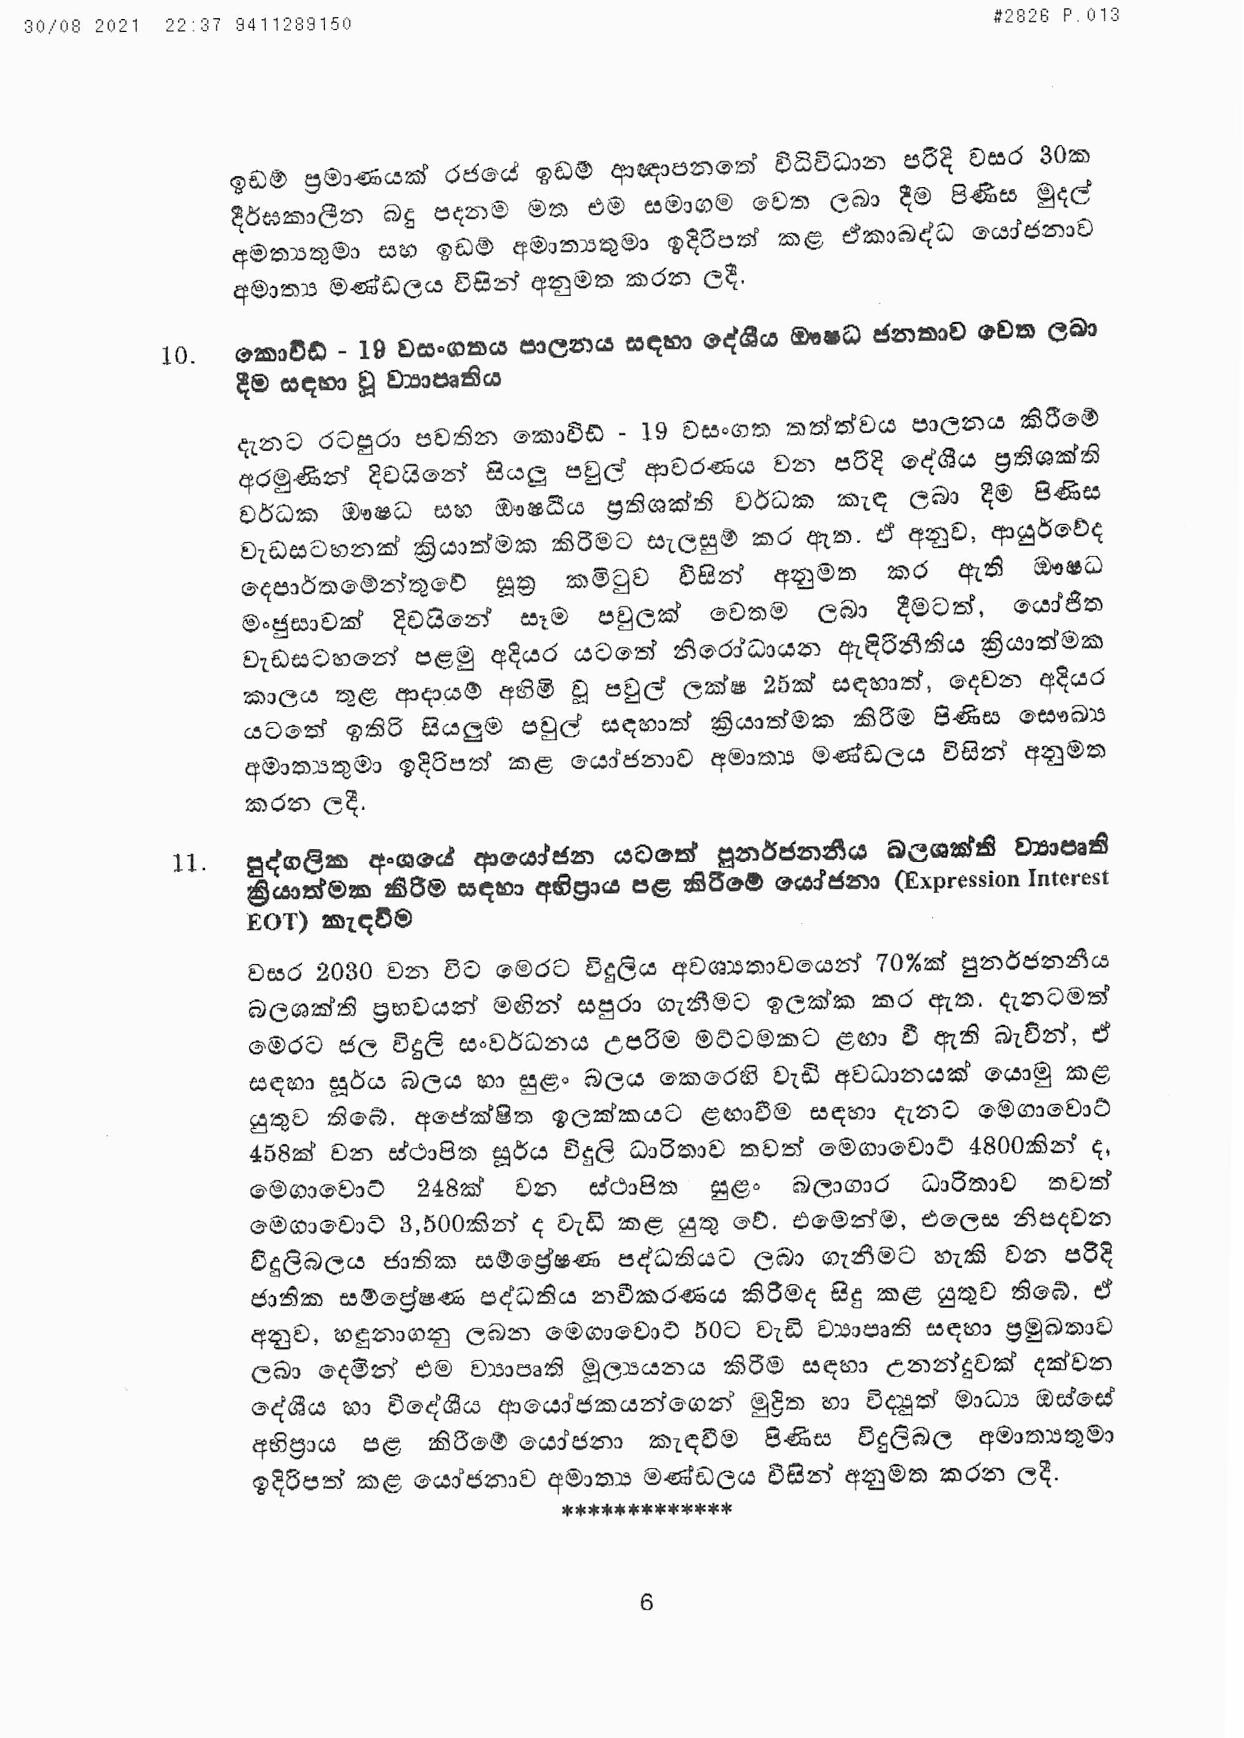 Cabinet Decision on 30.08.2021 Sinhala page 001